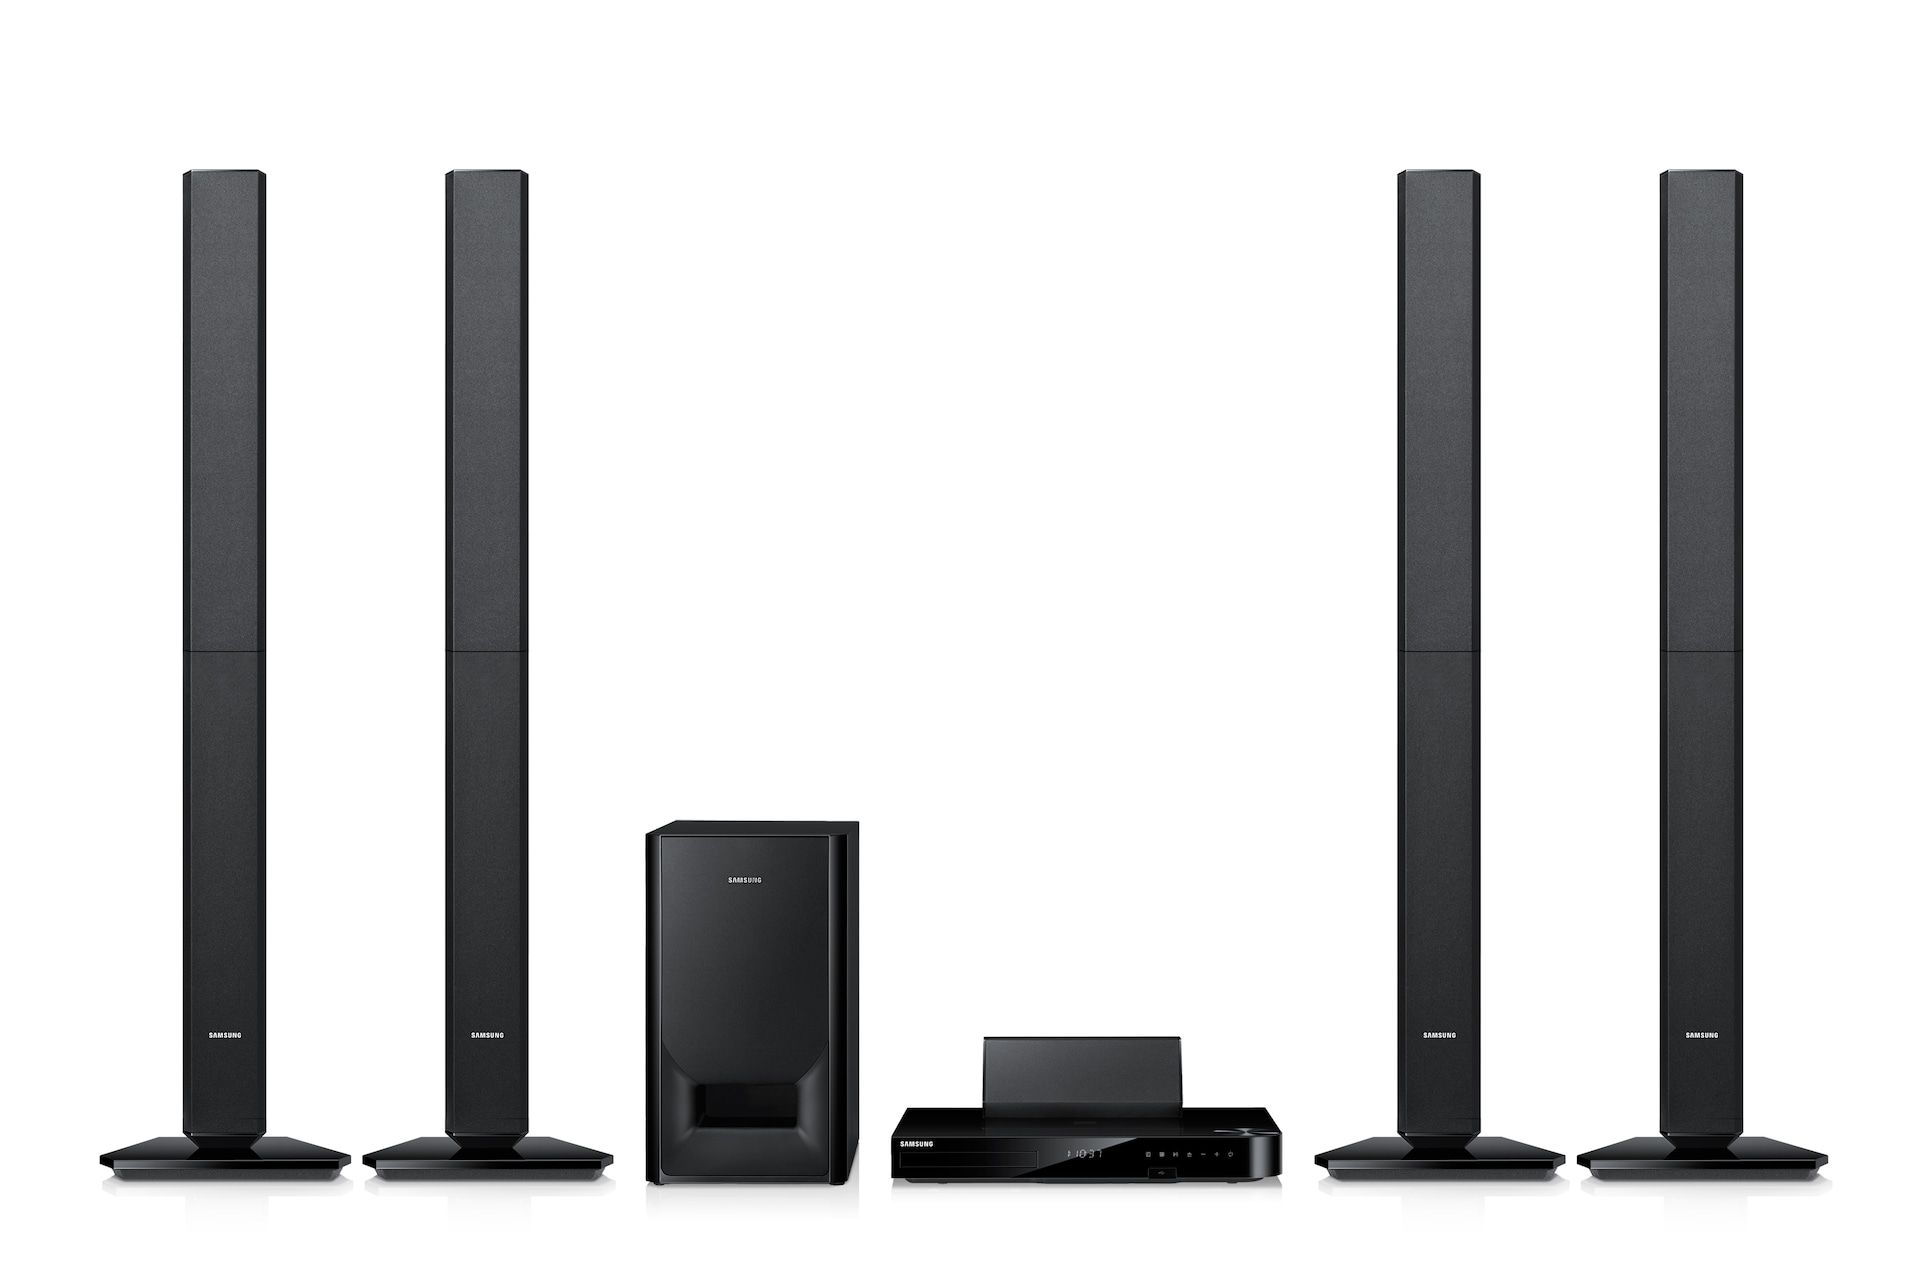 samsung 5.1 channel 1000w home theater system